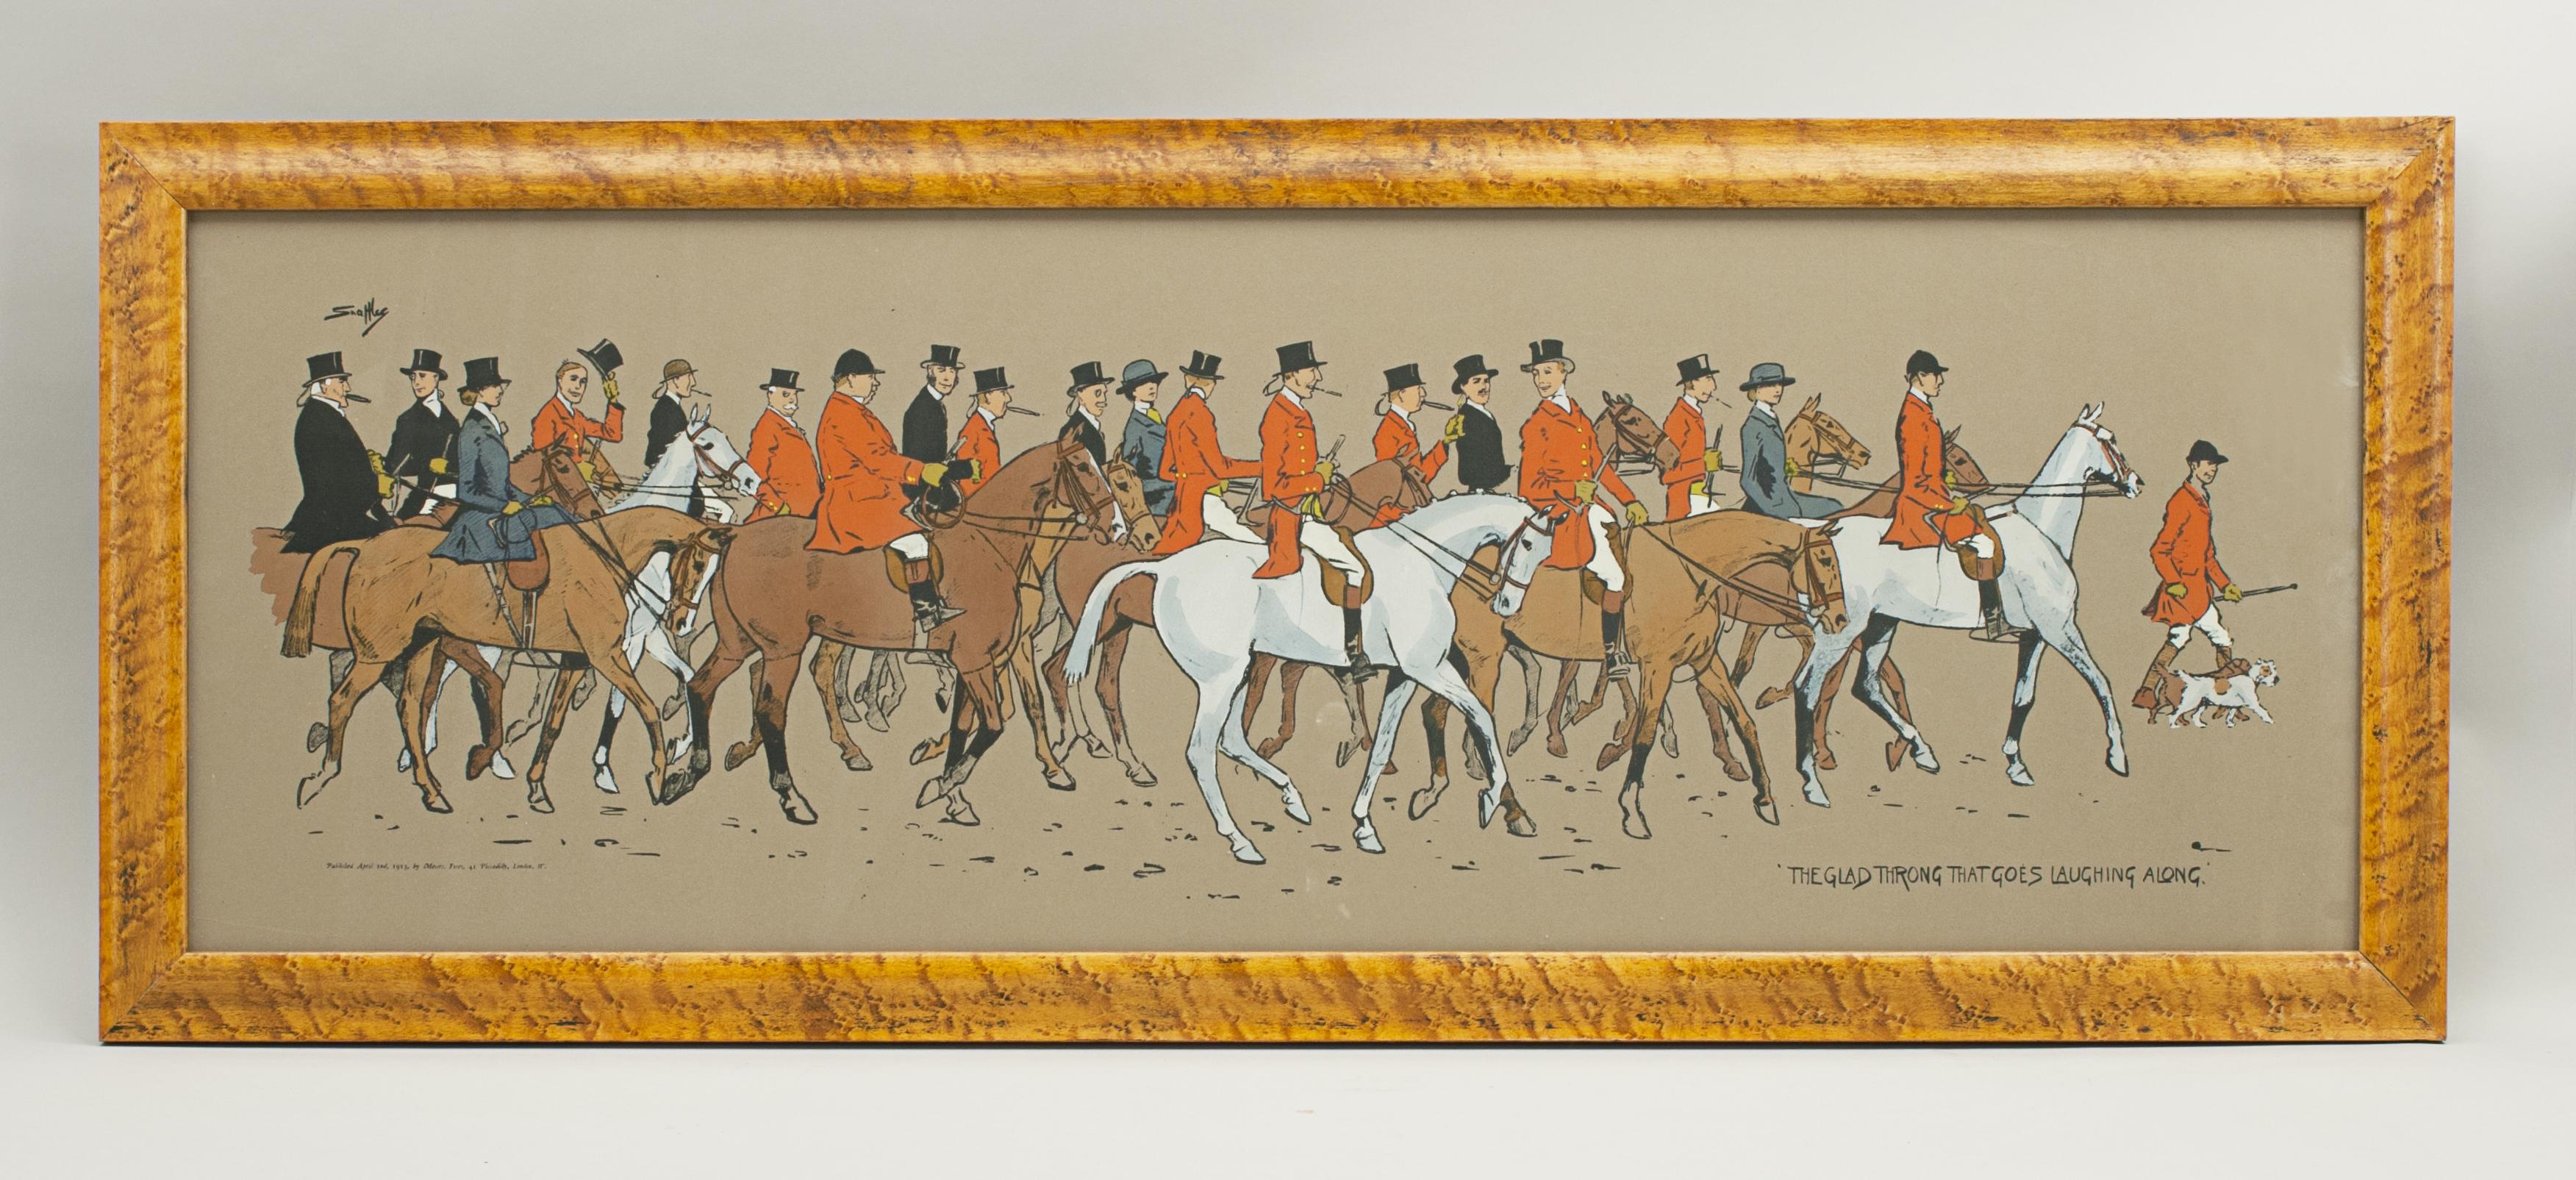 The Glad Throng That Goes Laughing Along.
A good large Snaffles hunting print 'The Glad Throng That Goes Laughing Along'. The Snaffles chromolithograph depicts a fox hunting field with a huntsman on foot at the front followed by the rest, including